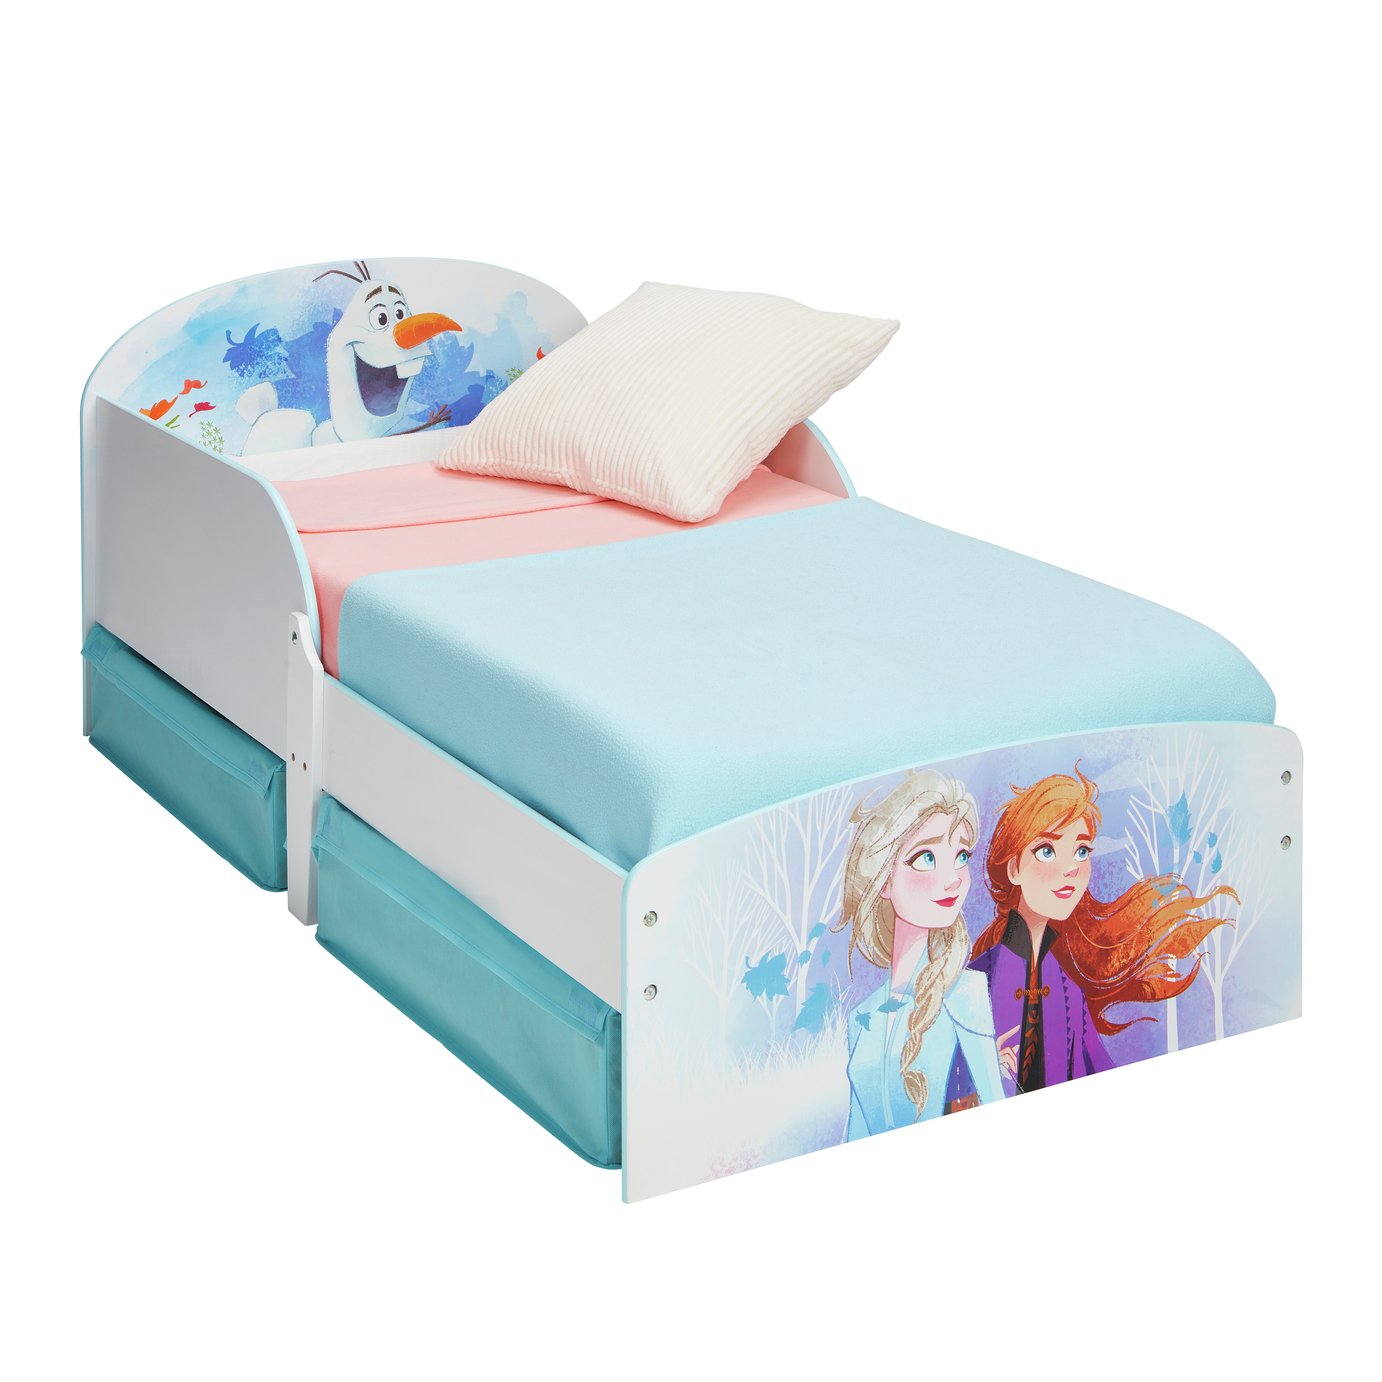 Disney Frozen Toddler Bed with Drawers Review